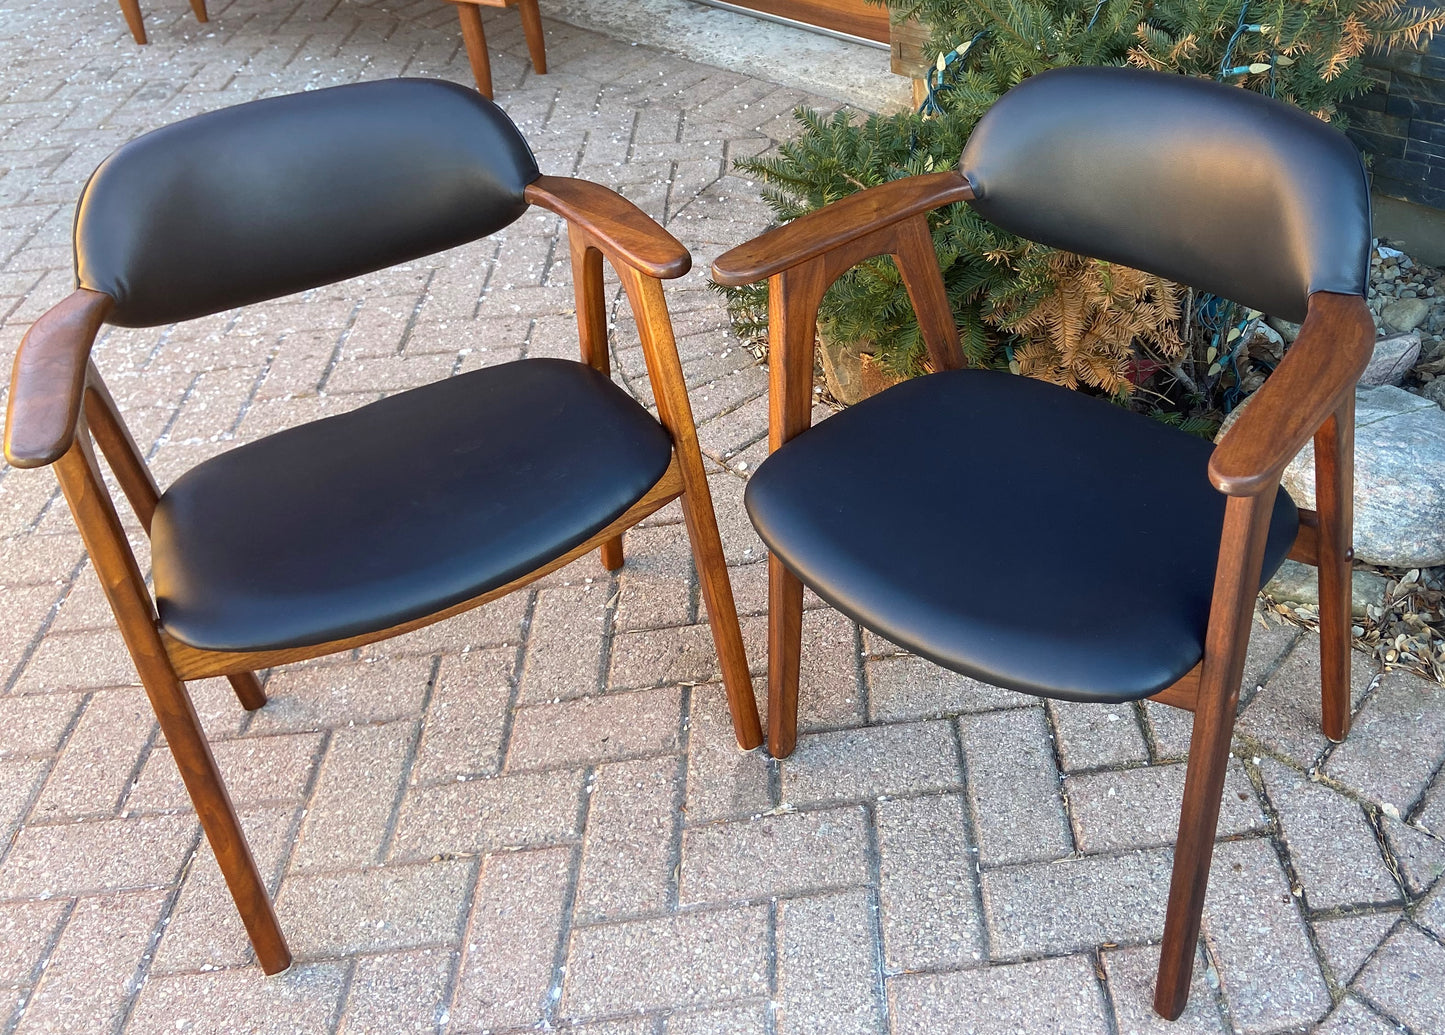 Set of 2 REFINISHED REUPHOLSTERED Mid Century Modern walnut armchairs